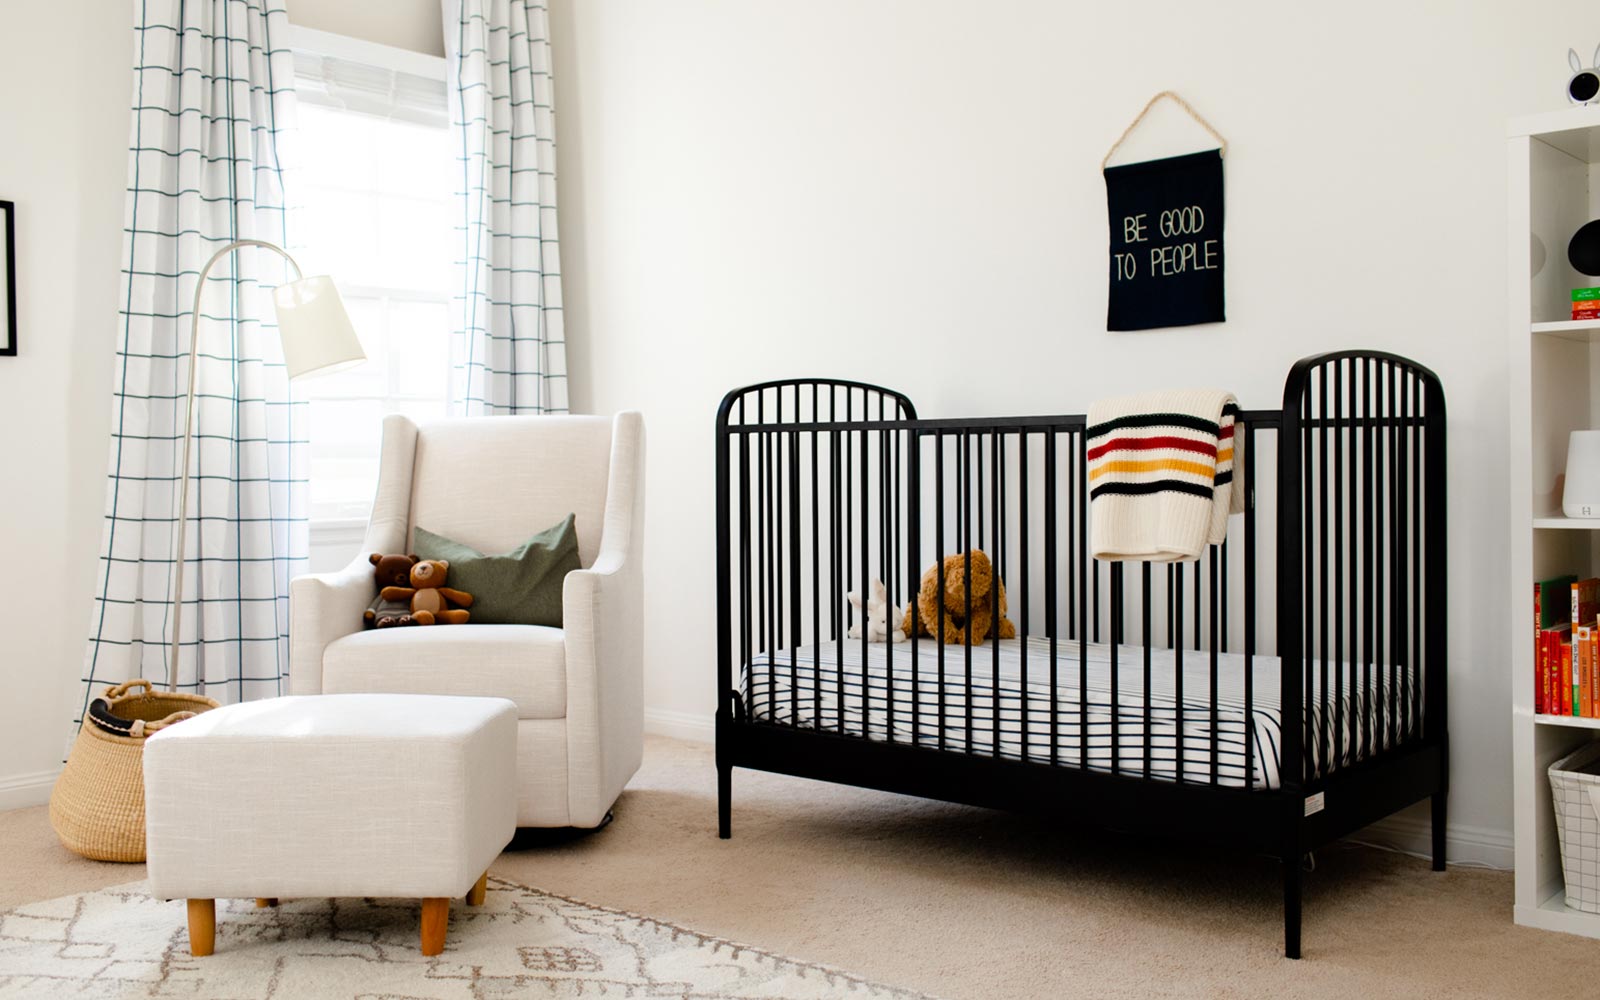 Baby on the way? Everything you need for baby's room - IKEA